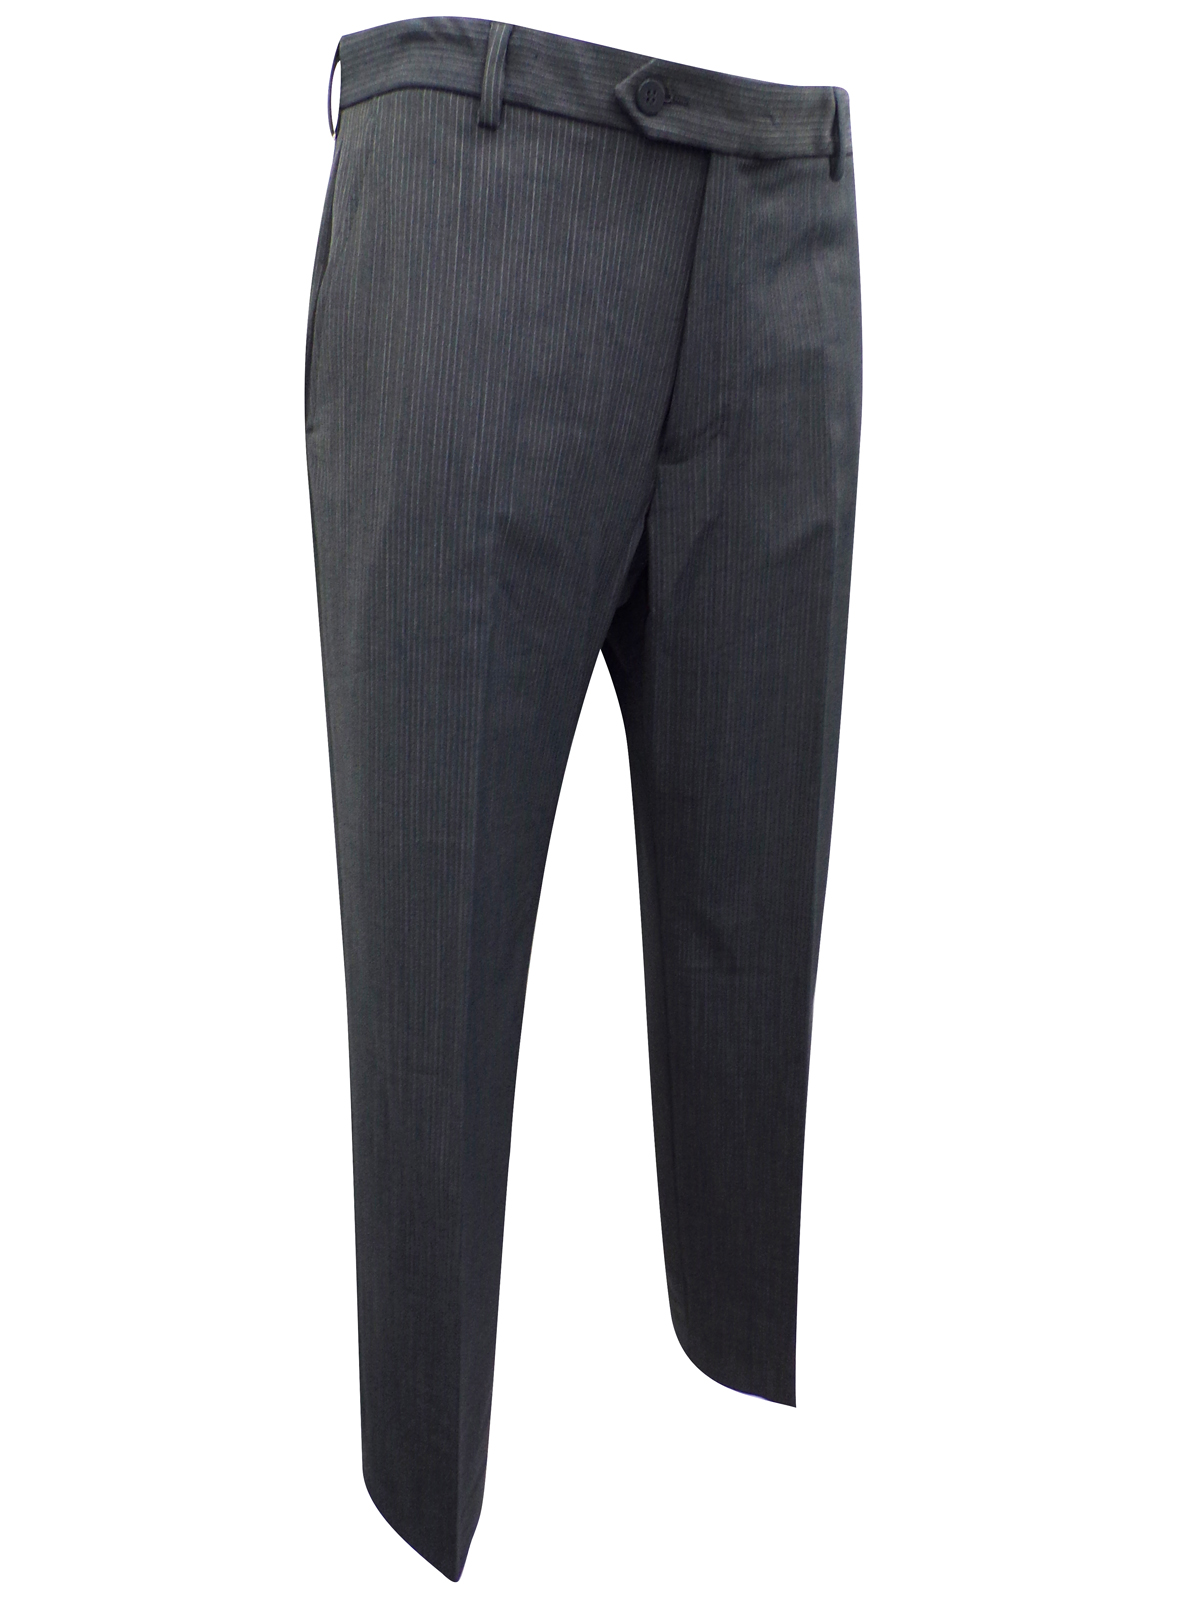 Marks and Spencer - - M&5 DARK-SLATE Wool Blend Pinstripe Trousers ...